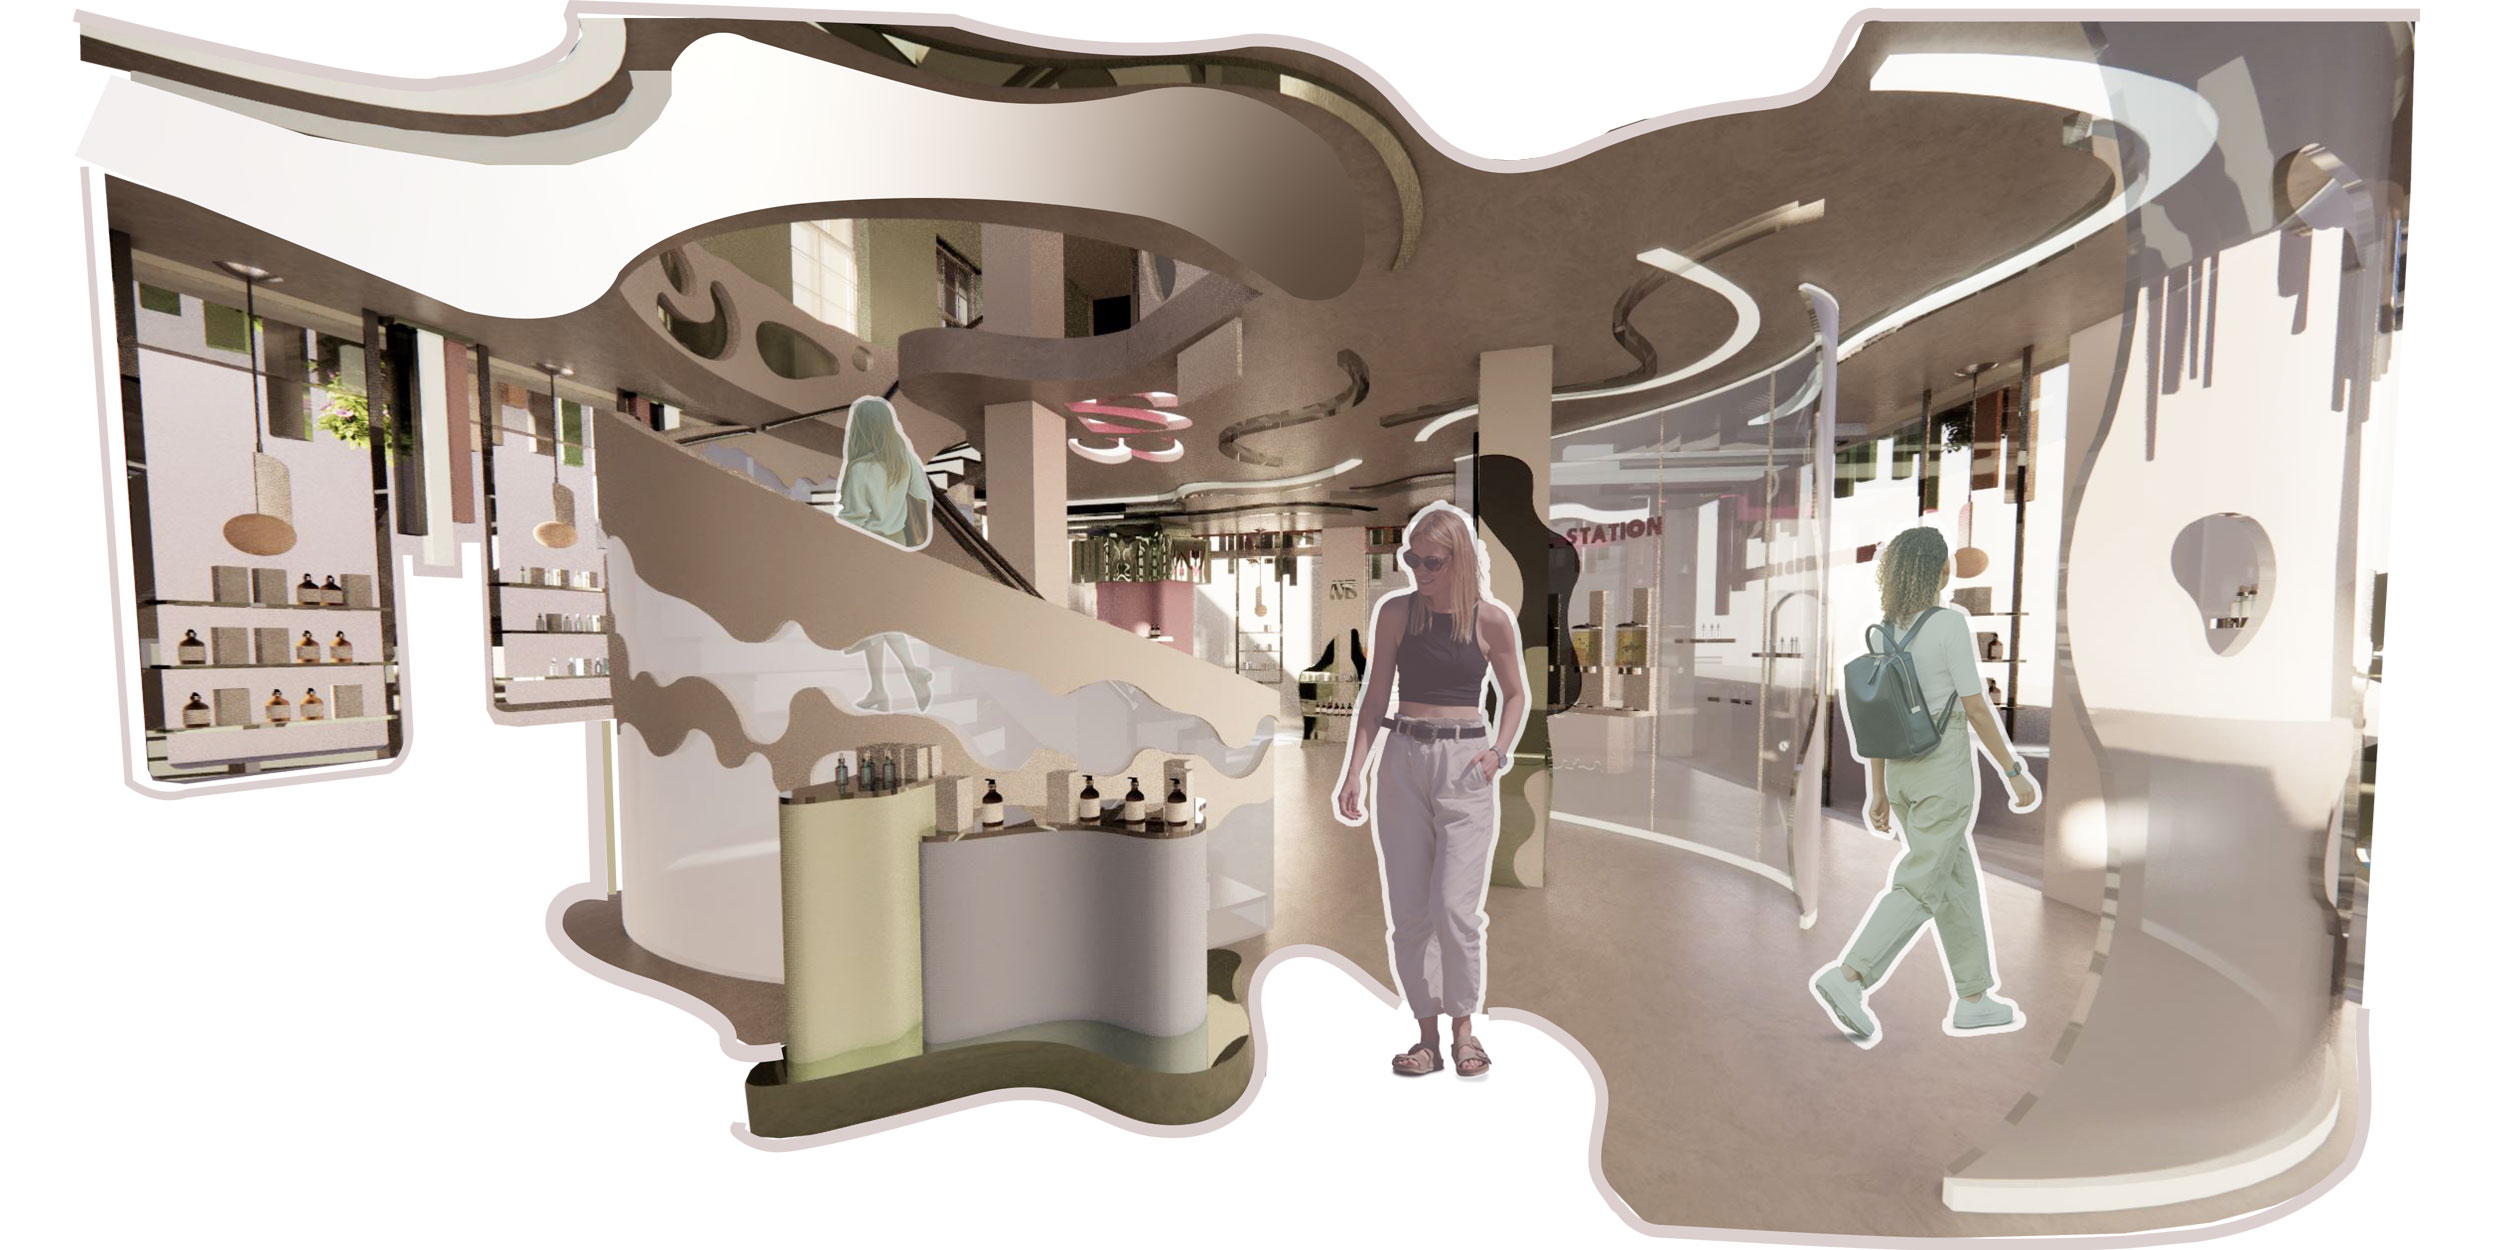 Another interor shop render showing circcular staircase in centre with waved pattern on, curved clear walls breaking up the space and the colours neutral.